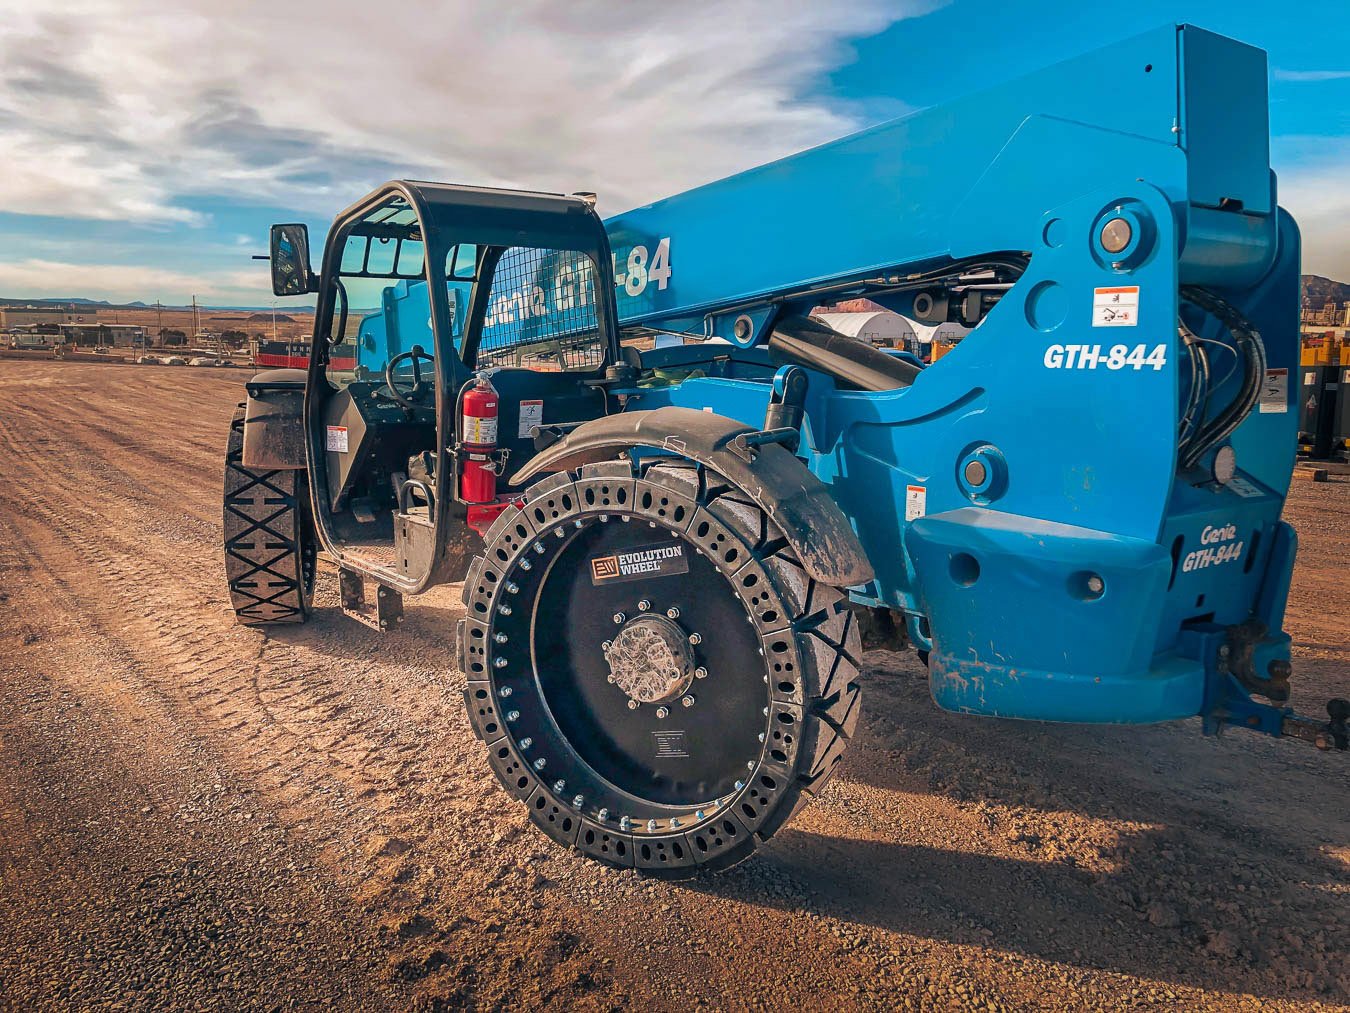 This image shows our CAT telehandler tires for a blue Genie telehandler.